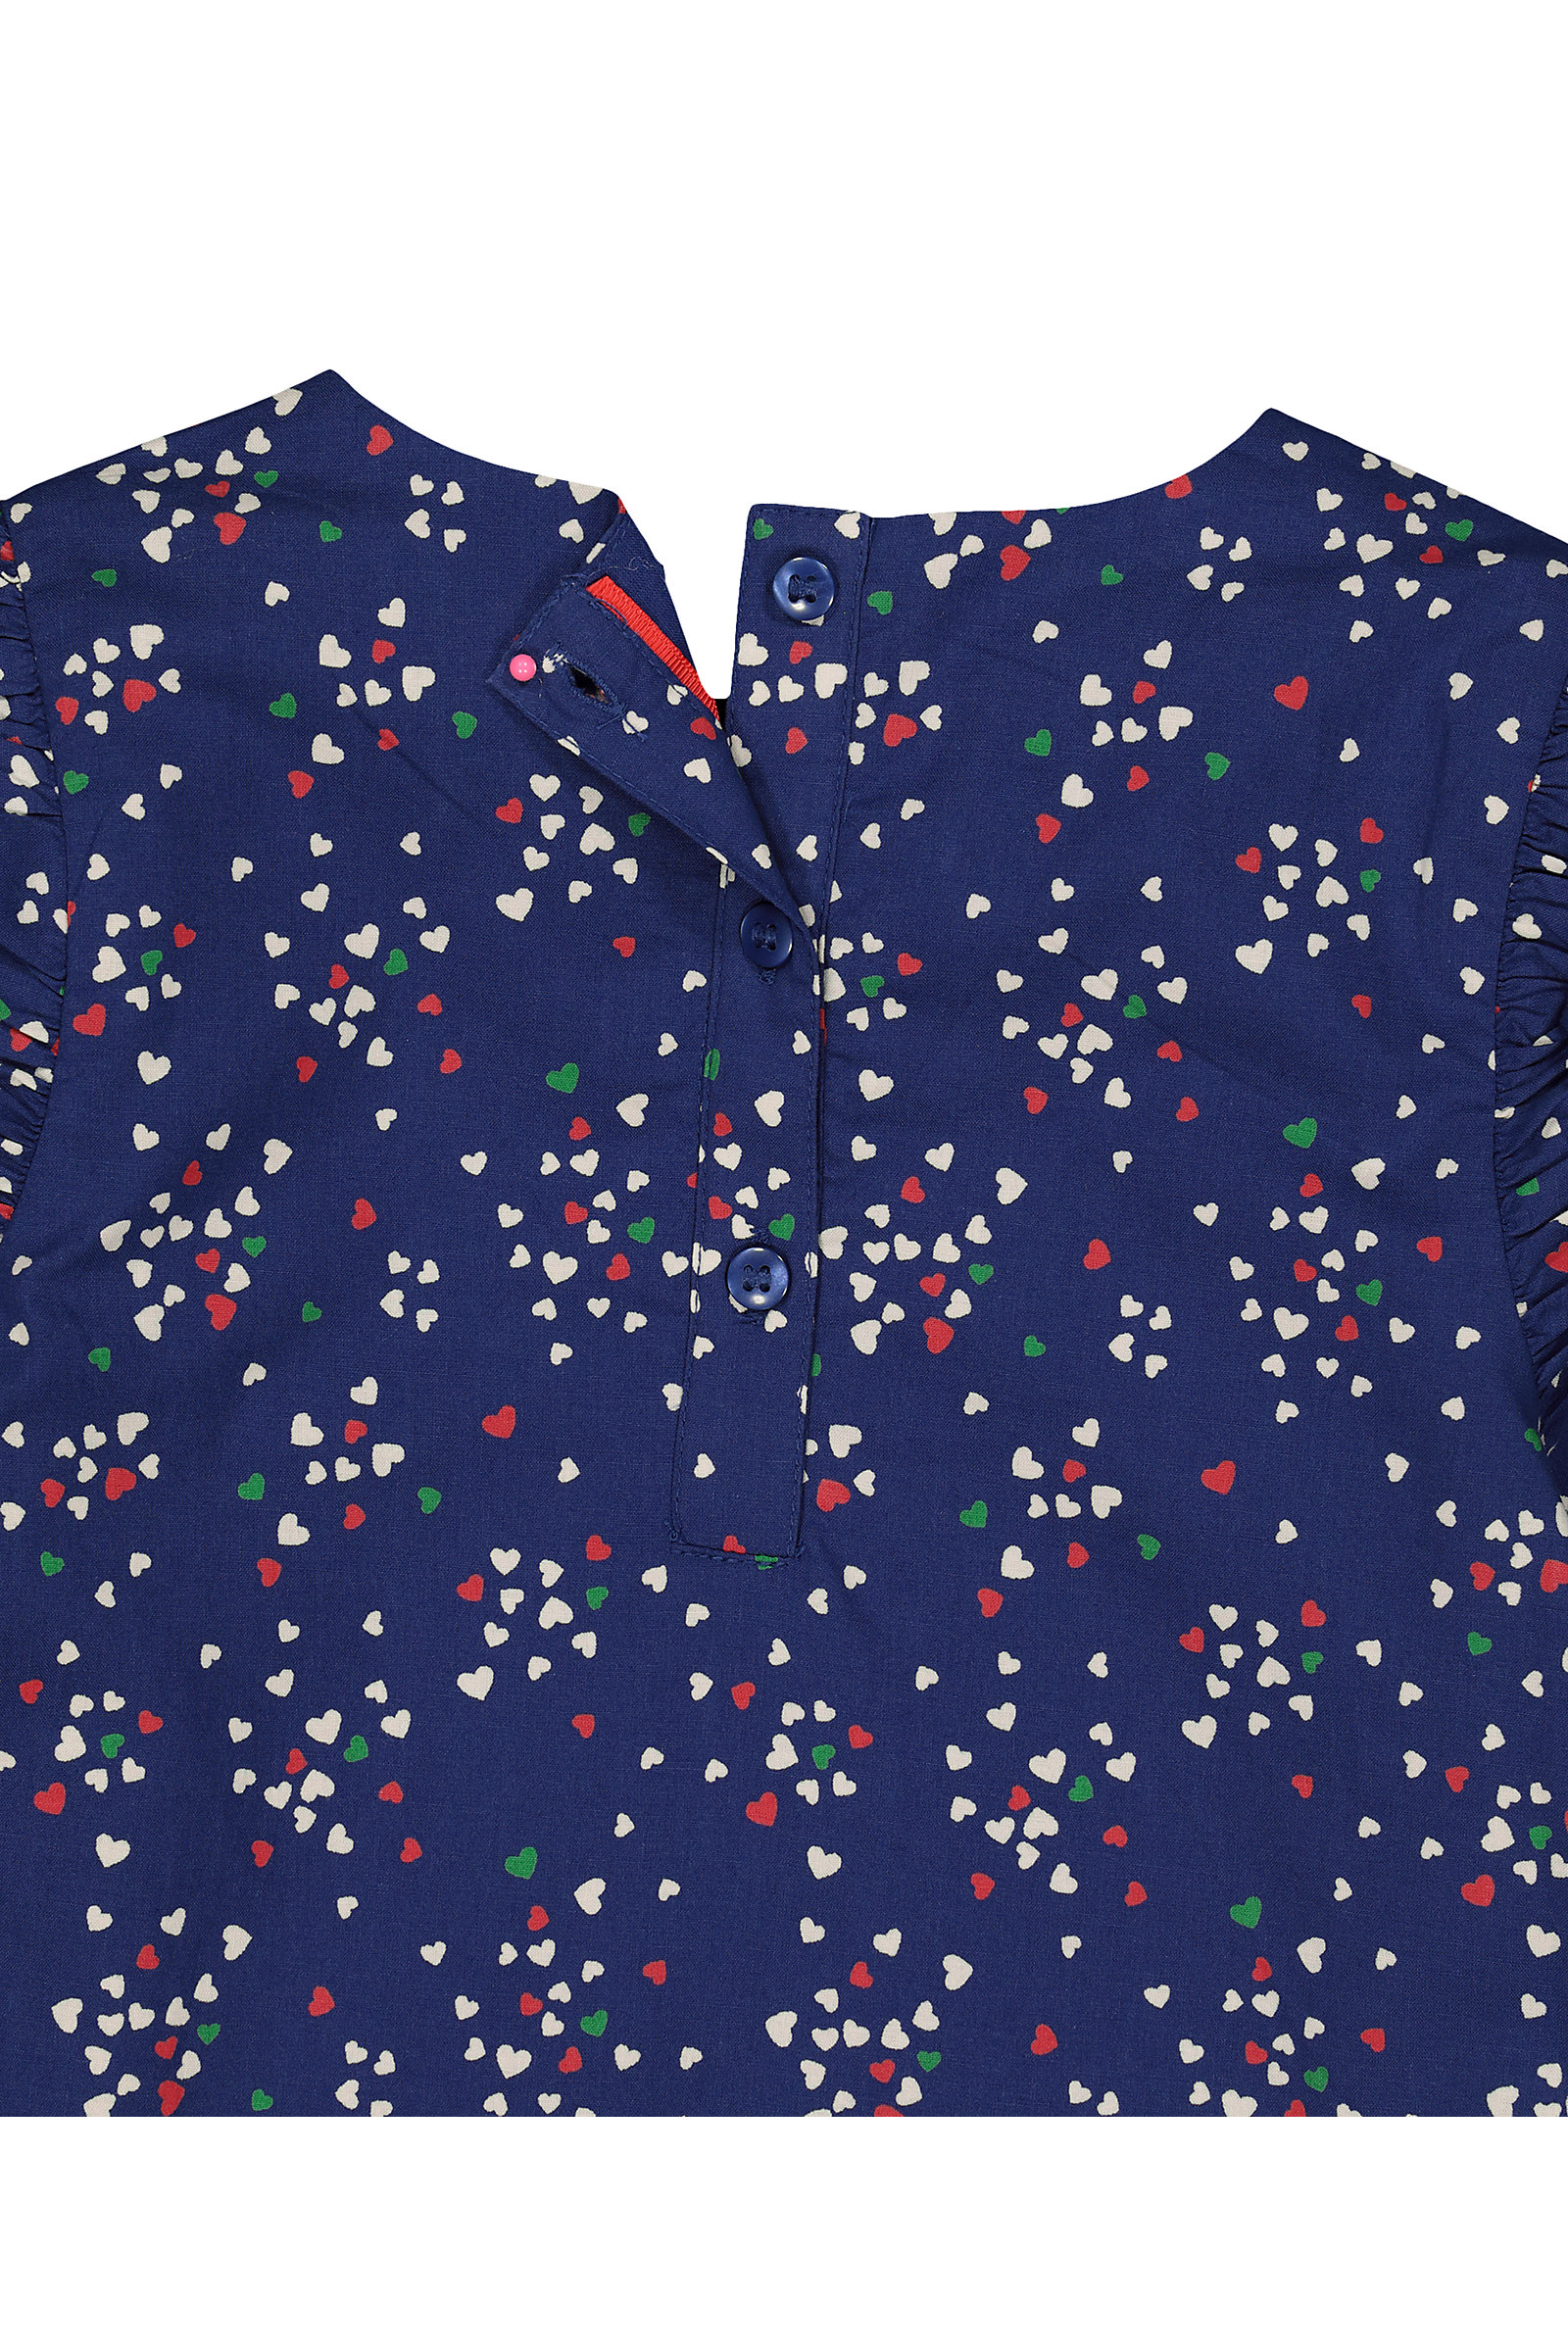 Mothercare Girls Printed Navy Dresses